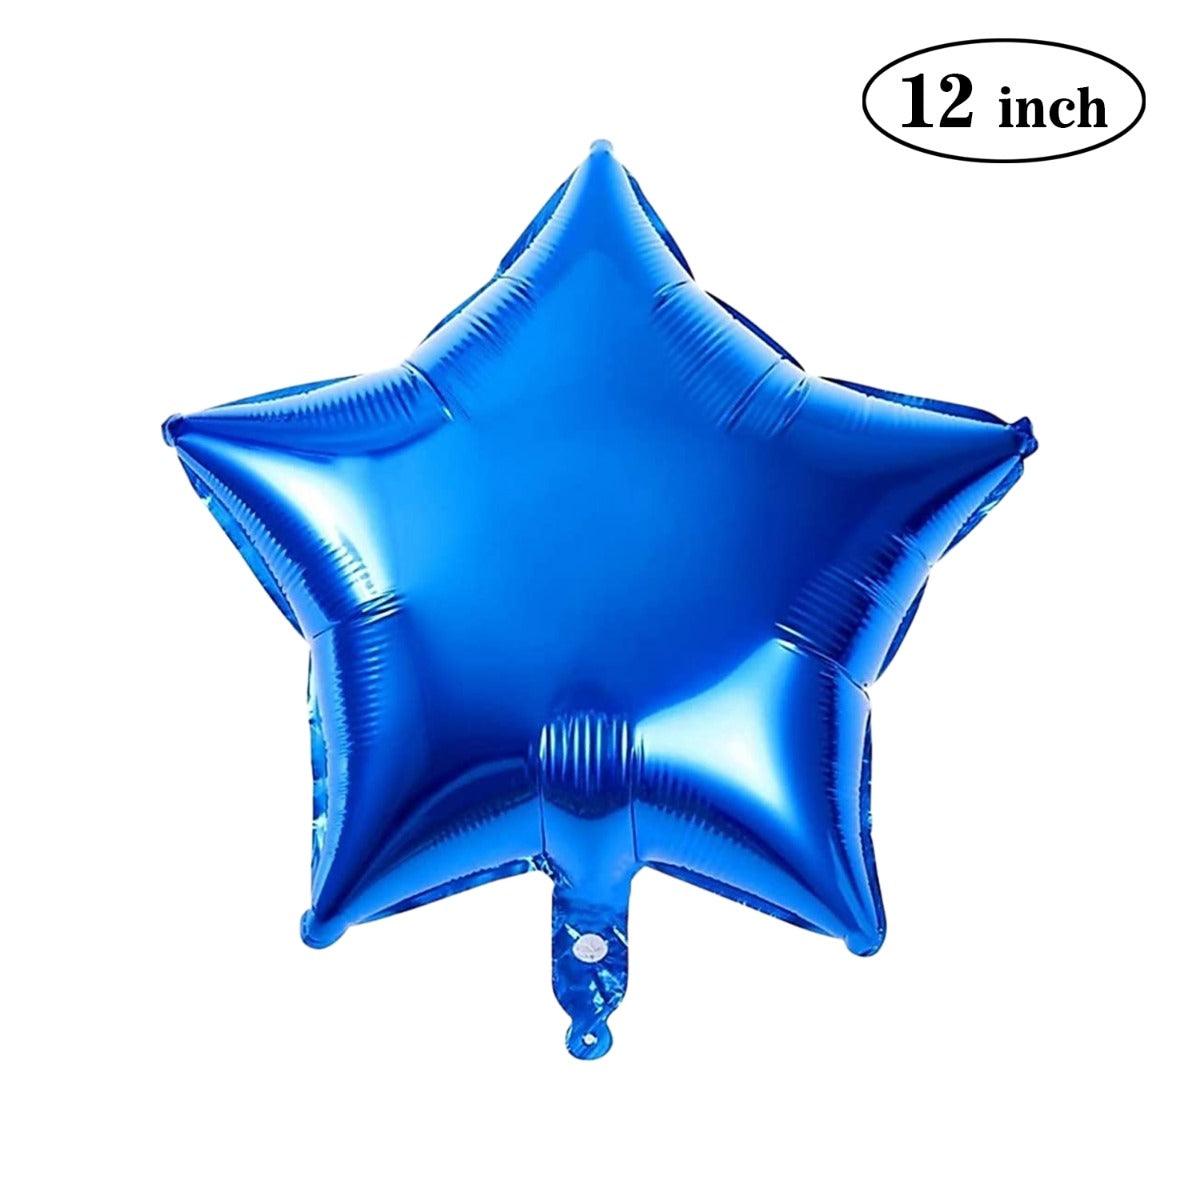 PartyCorp 12 Inch Blue Star Foil Balloon, 1 pc